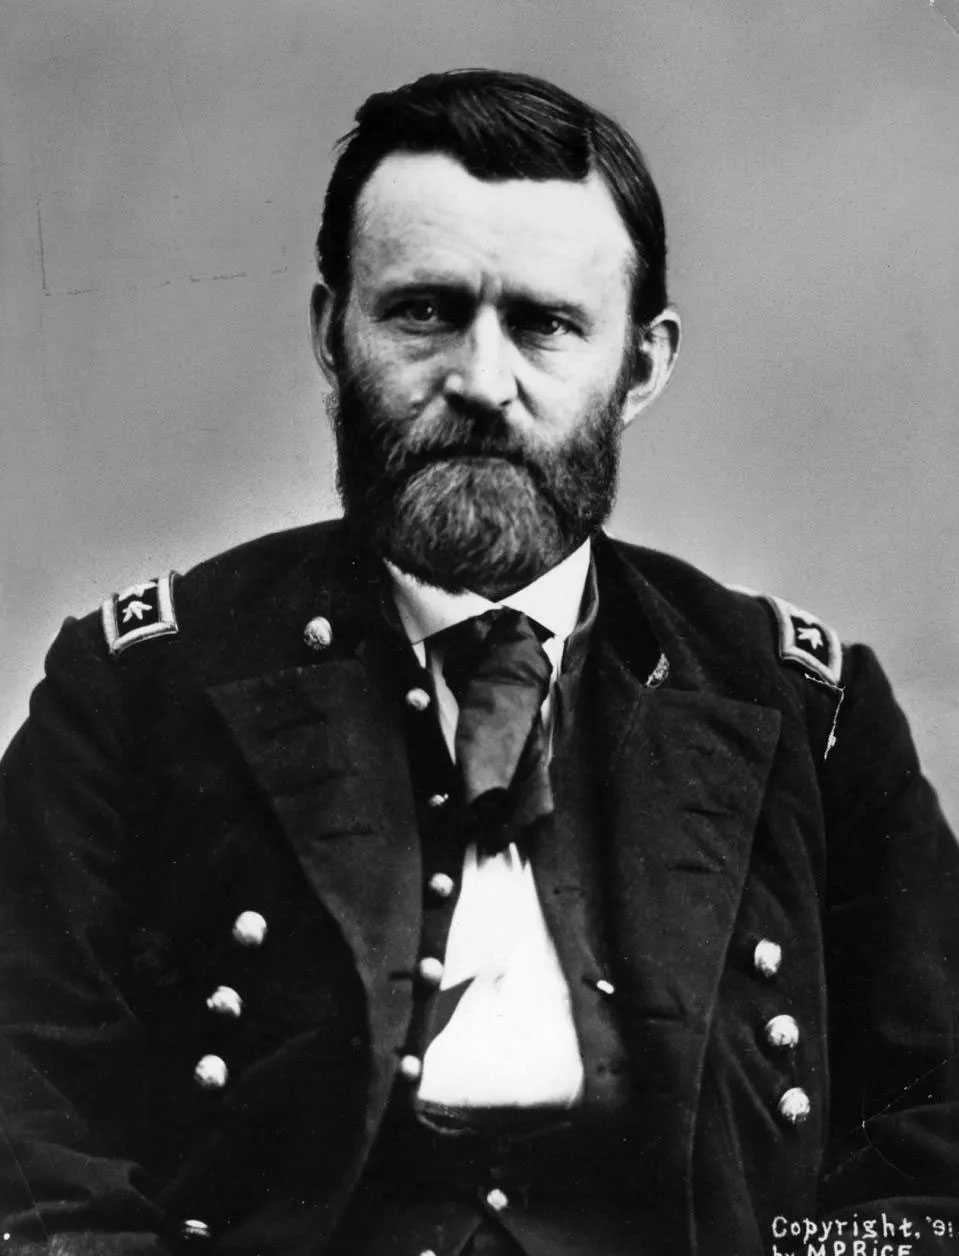 circa 1860: Ulysses Simpson Grant (1822 - 1885) American soldier and later the 18th President of the United States.